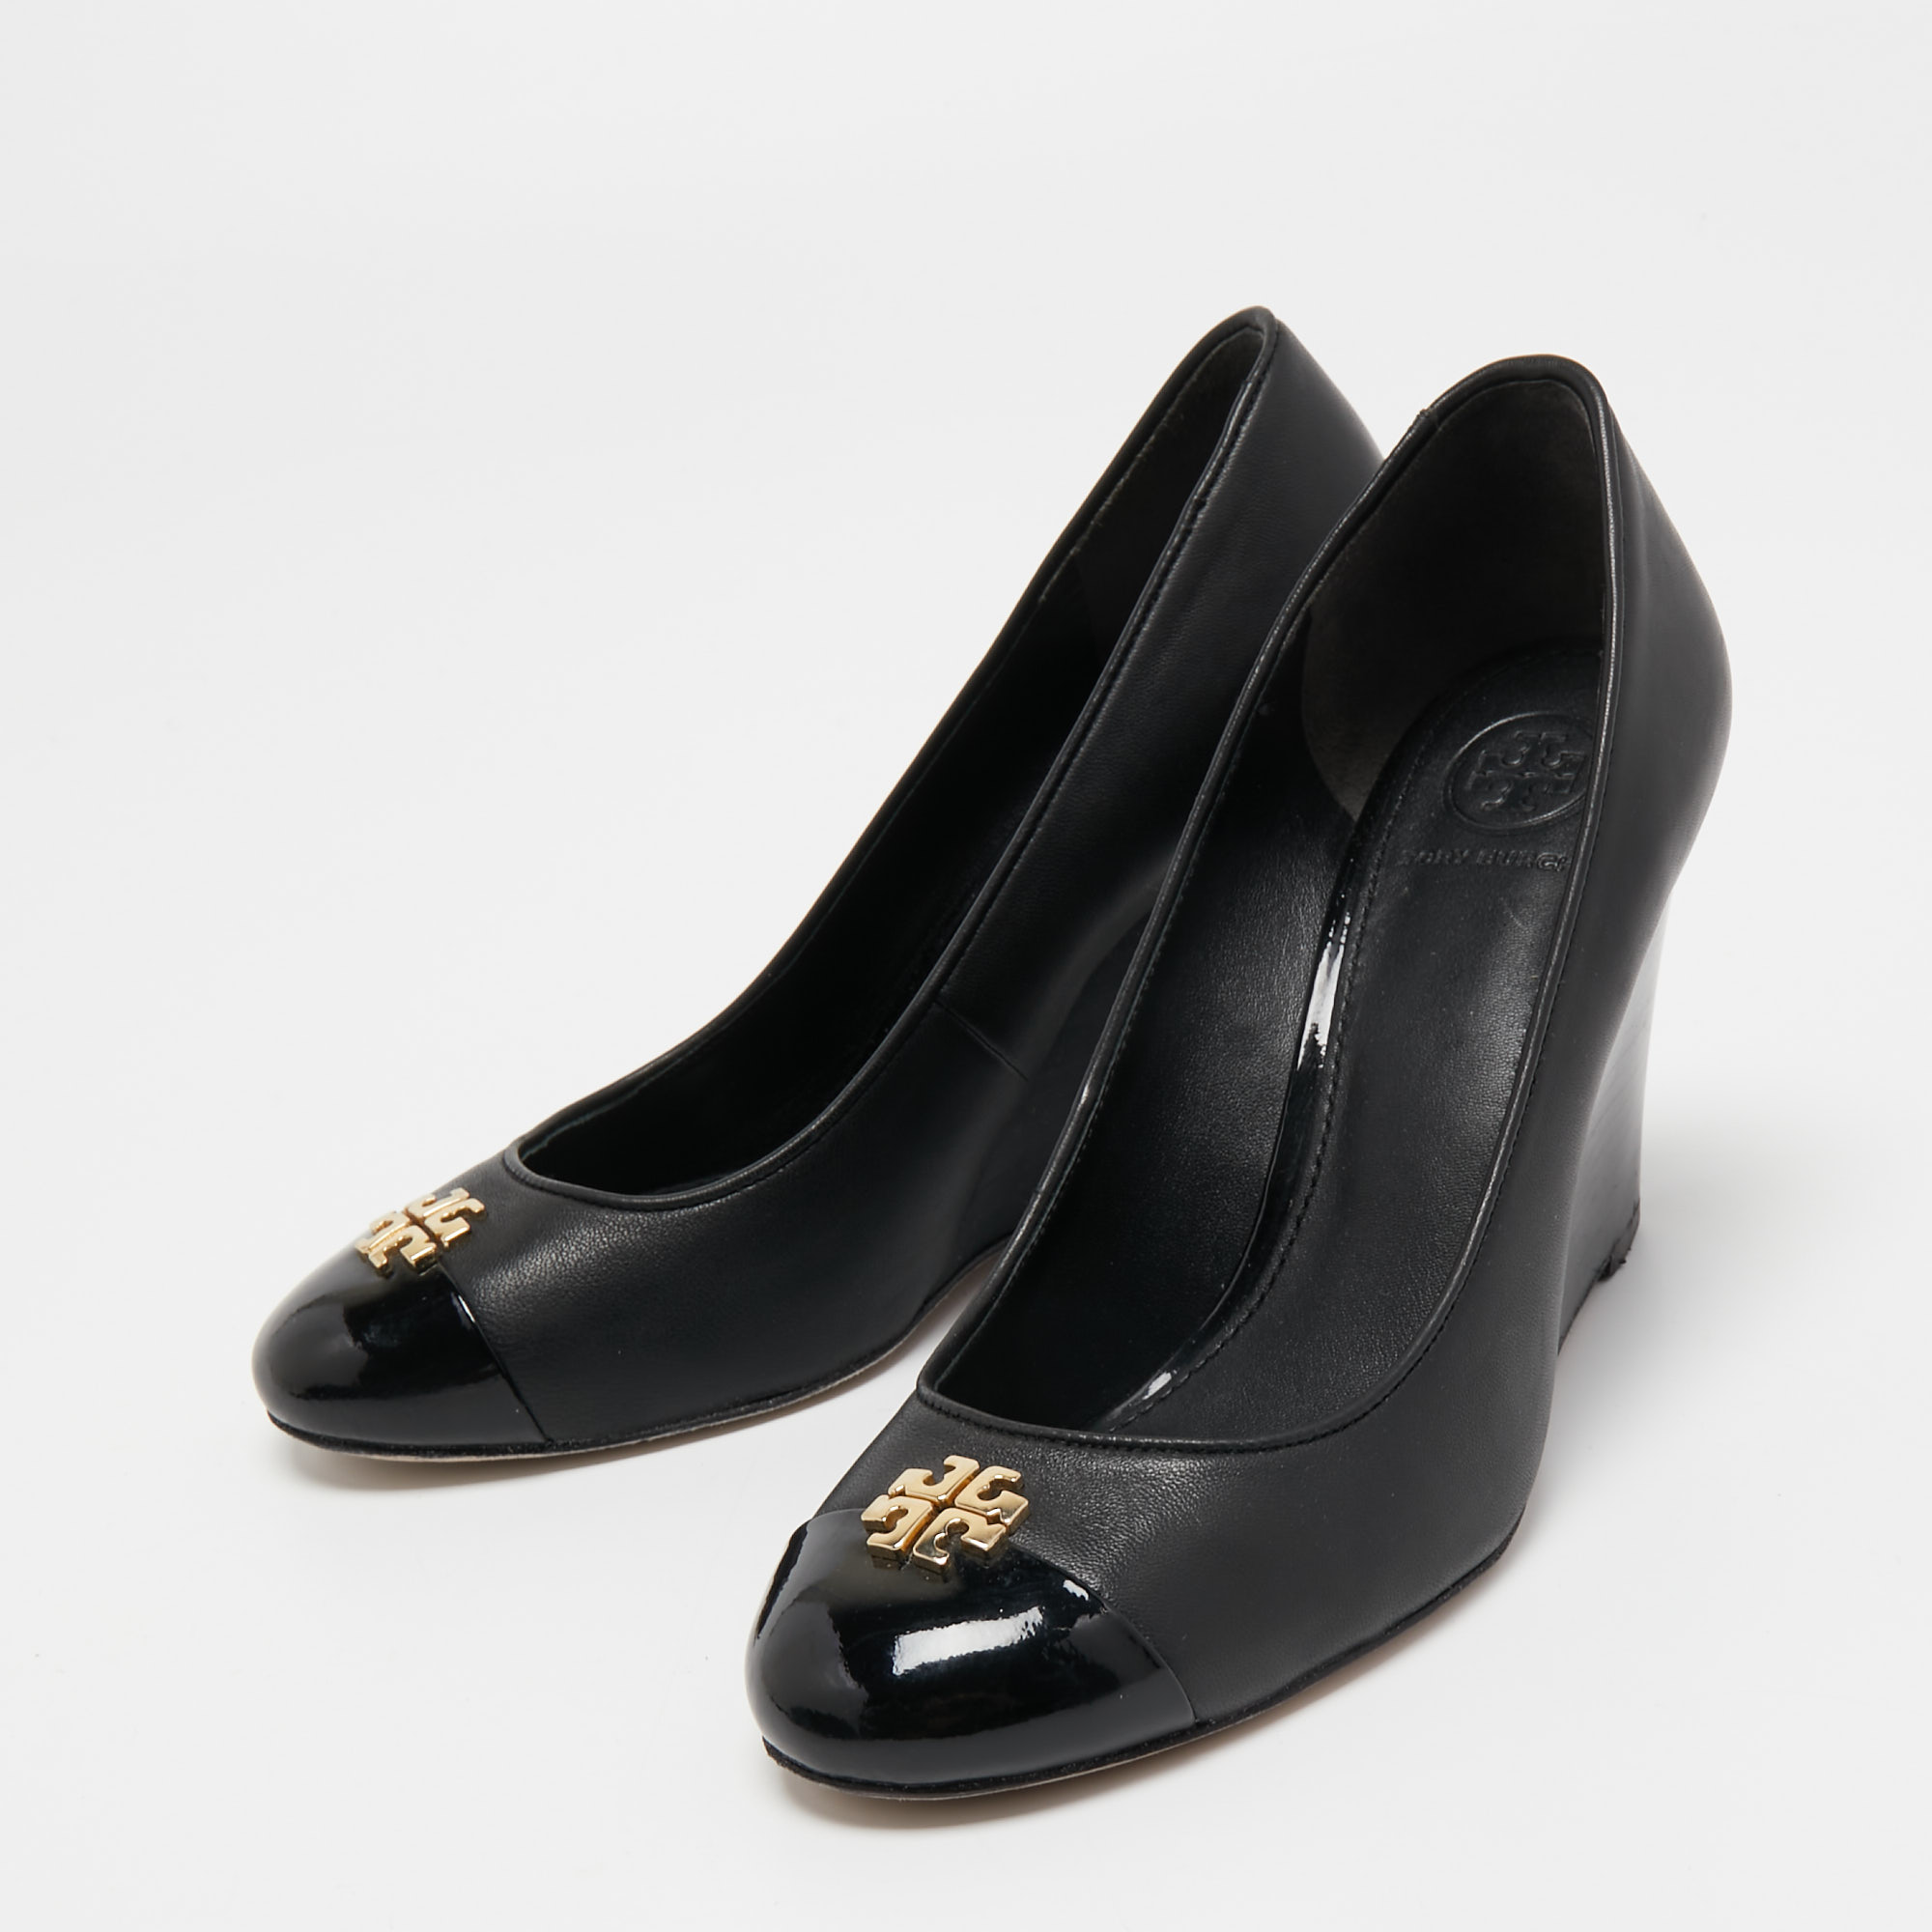 

Tory Burch Black Leather and Patent Cap Toe Reva Wedge Pumps Size